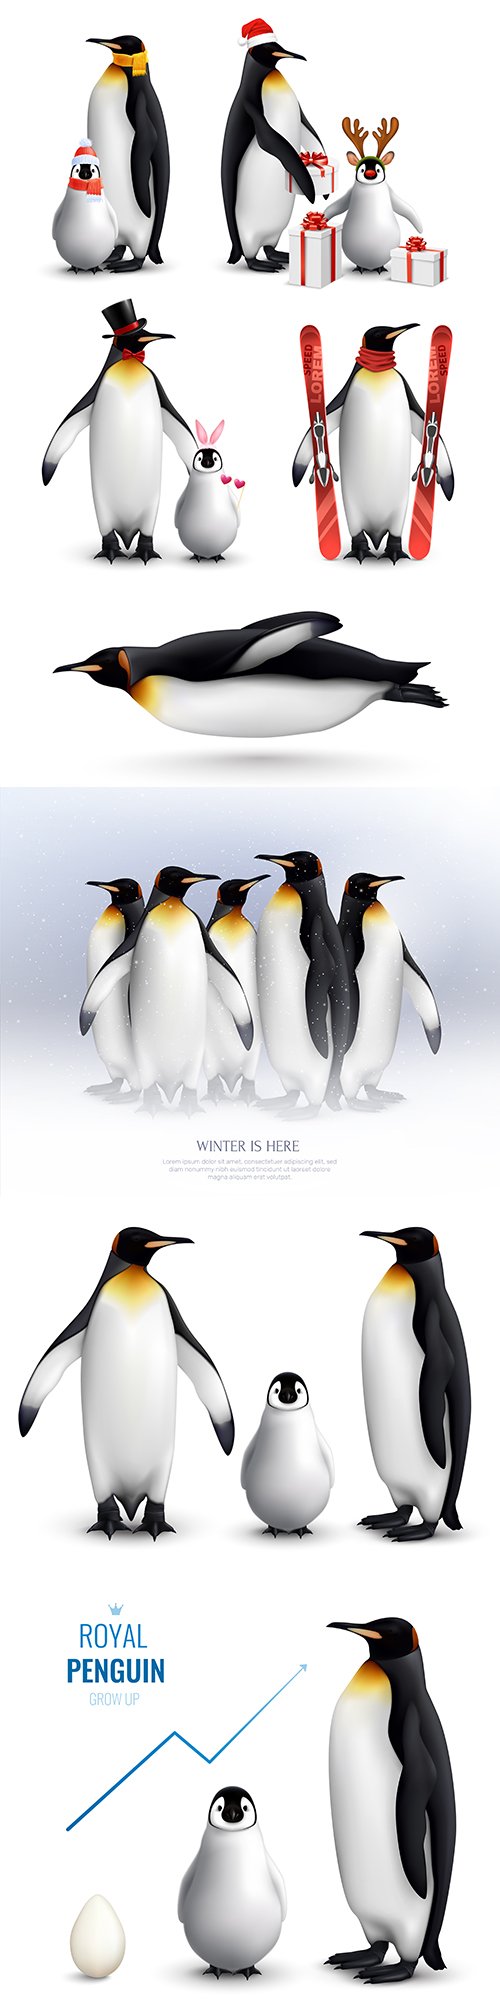 Royal penguin’s family with baby realistic illustrations